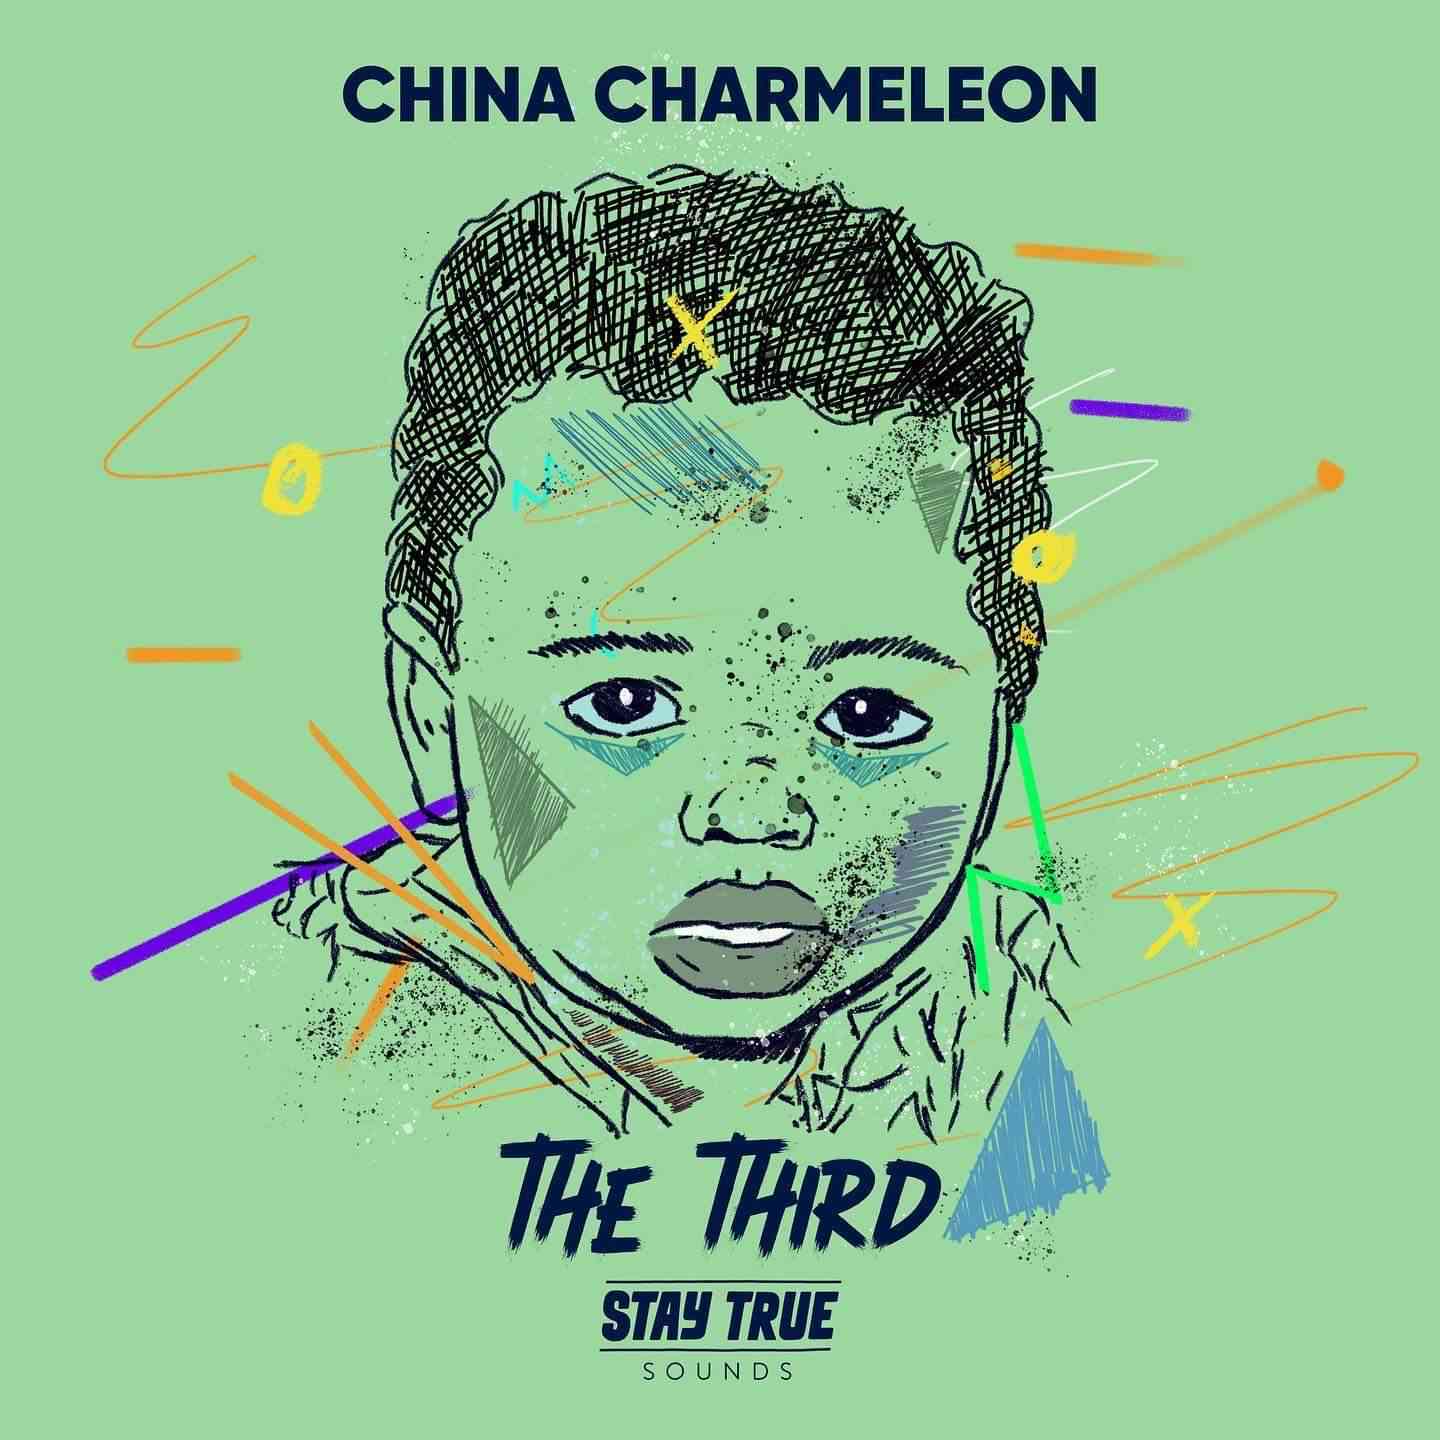 China Charmeleon Takes Charge With The Third Album